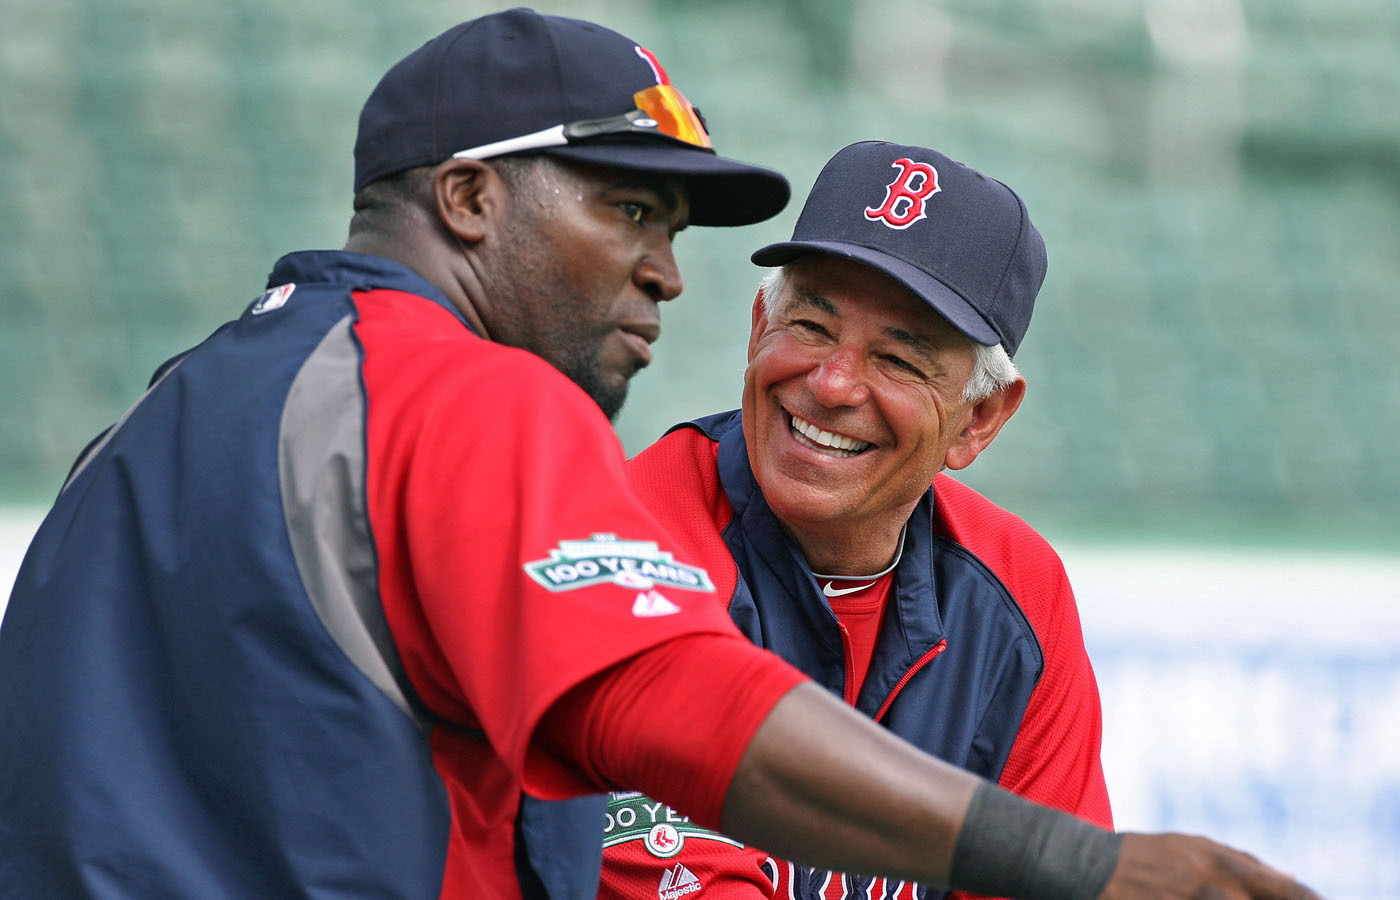 Bobby Valentine was hired during the offseason to replace Terry Francona as manager of the Red Sox. Here, he greets Ortiz during a February workout at spring training.